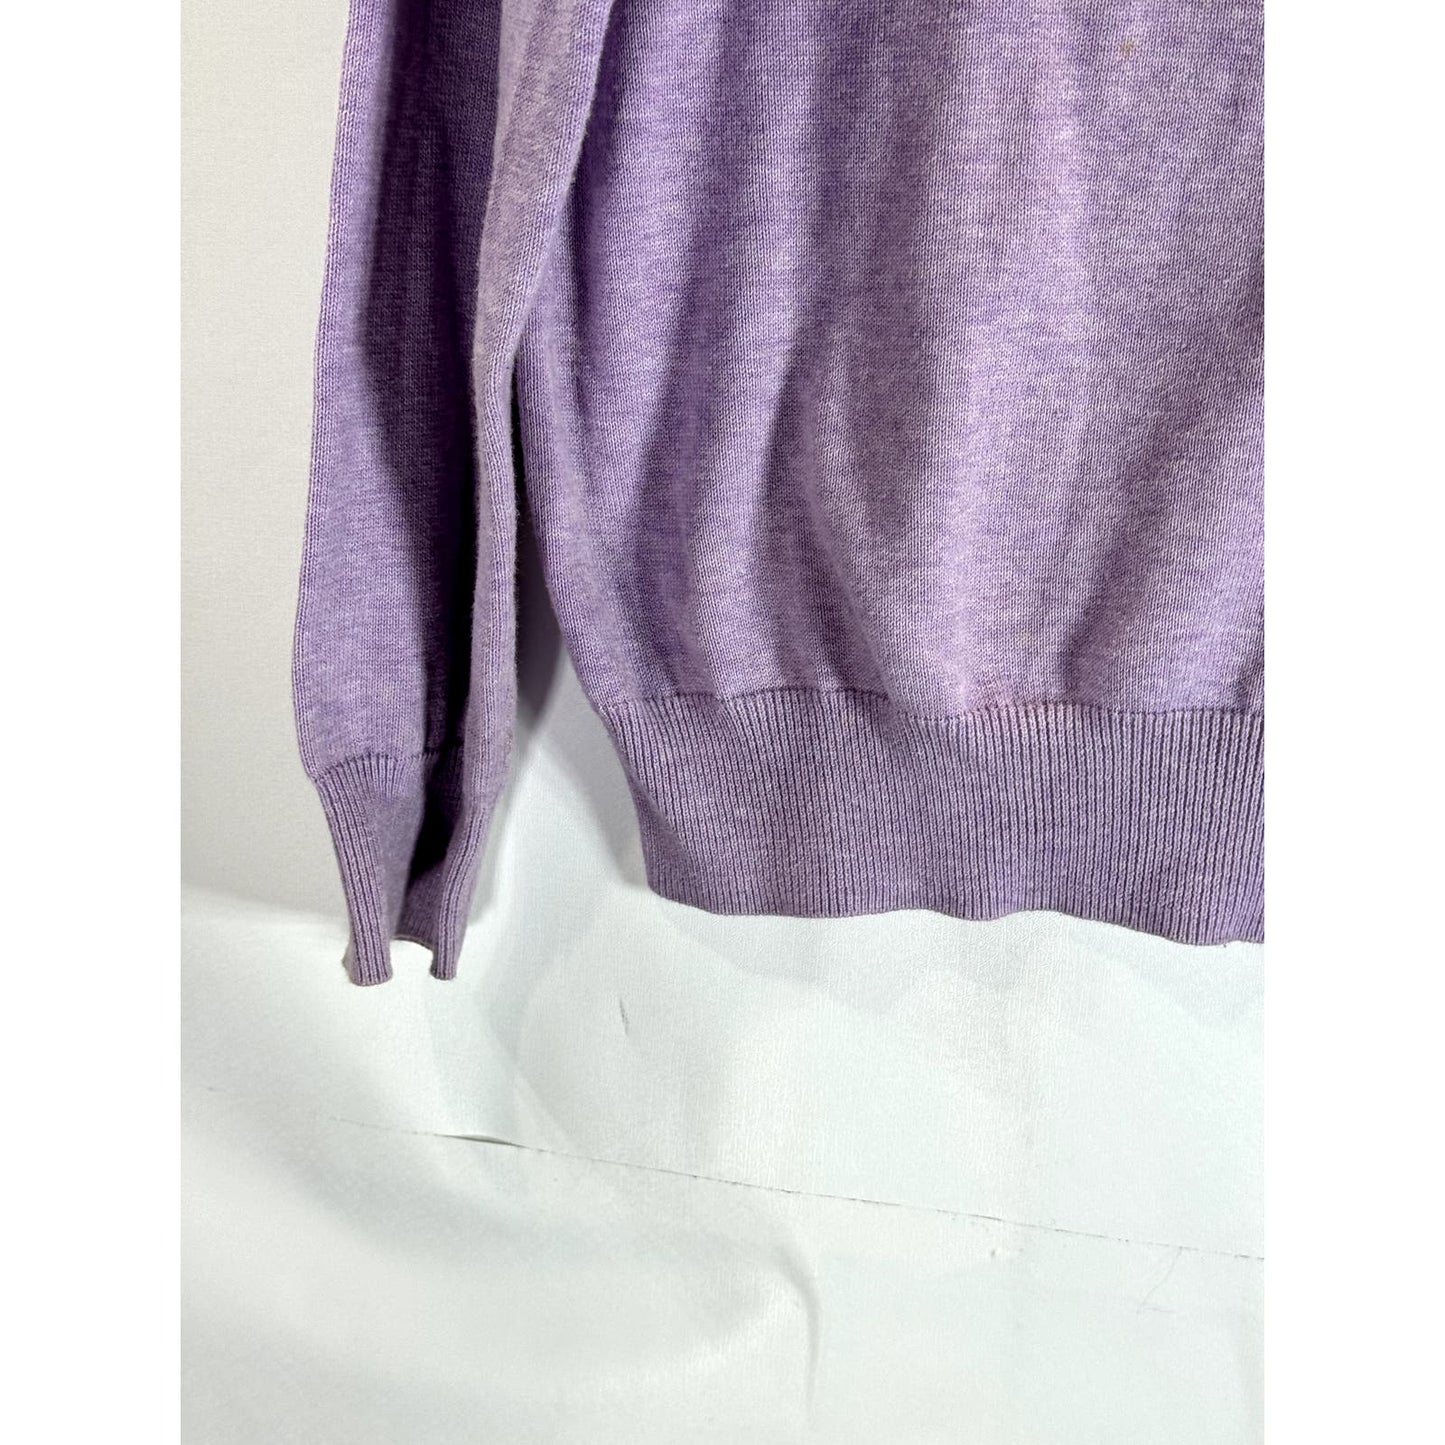 UNTUCKIT Men's Lilac V-Neck Cotton Long Sleeve Pullover Sweater SZ M